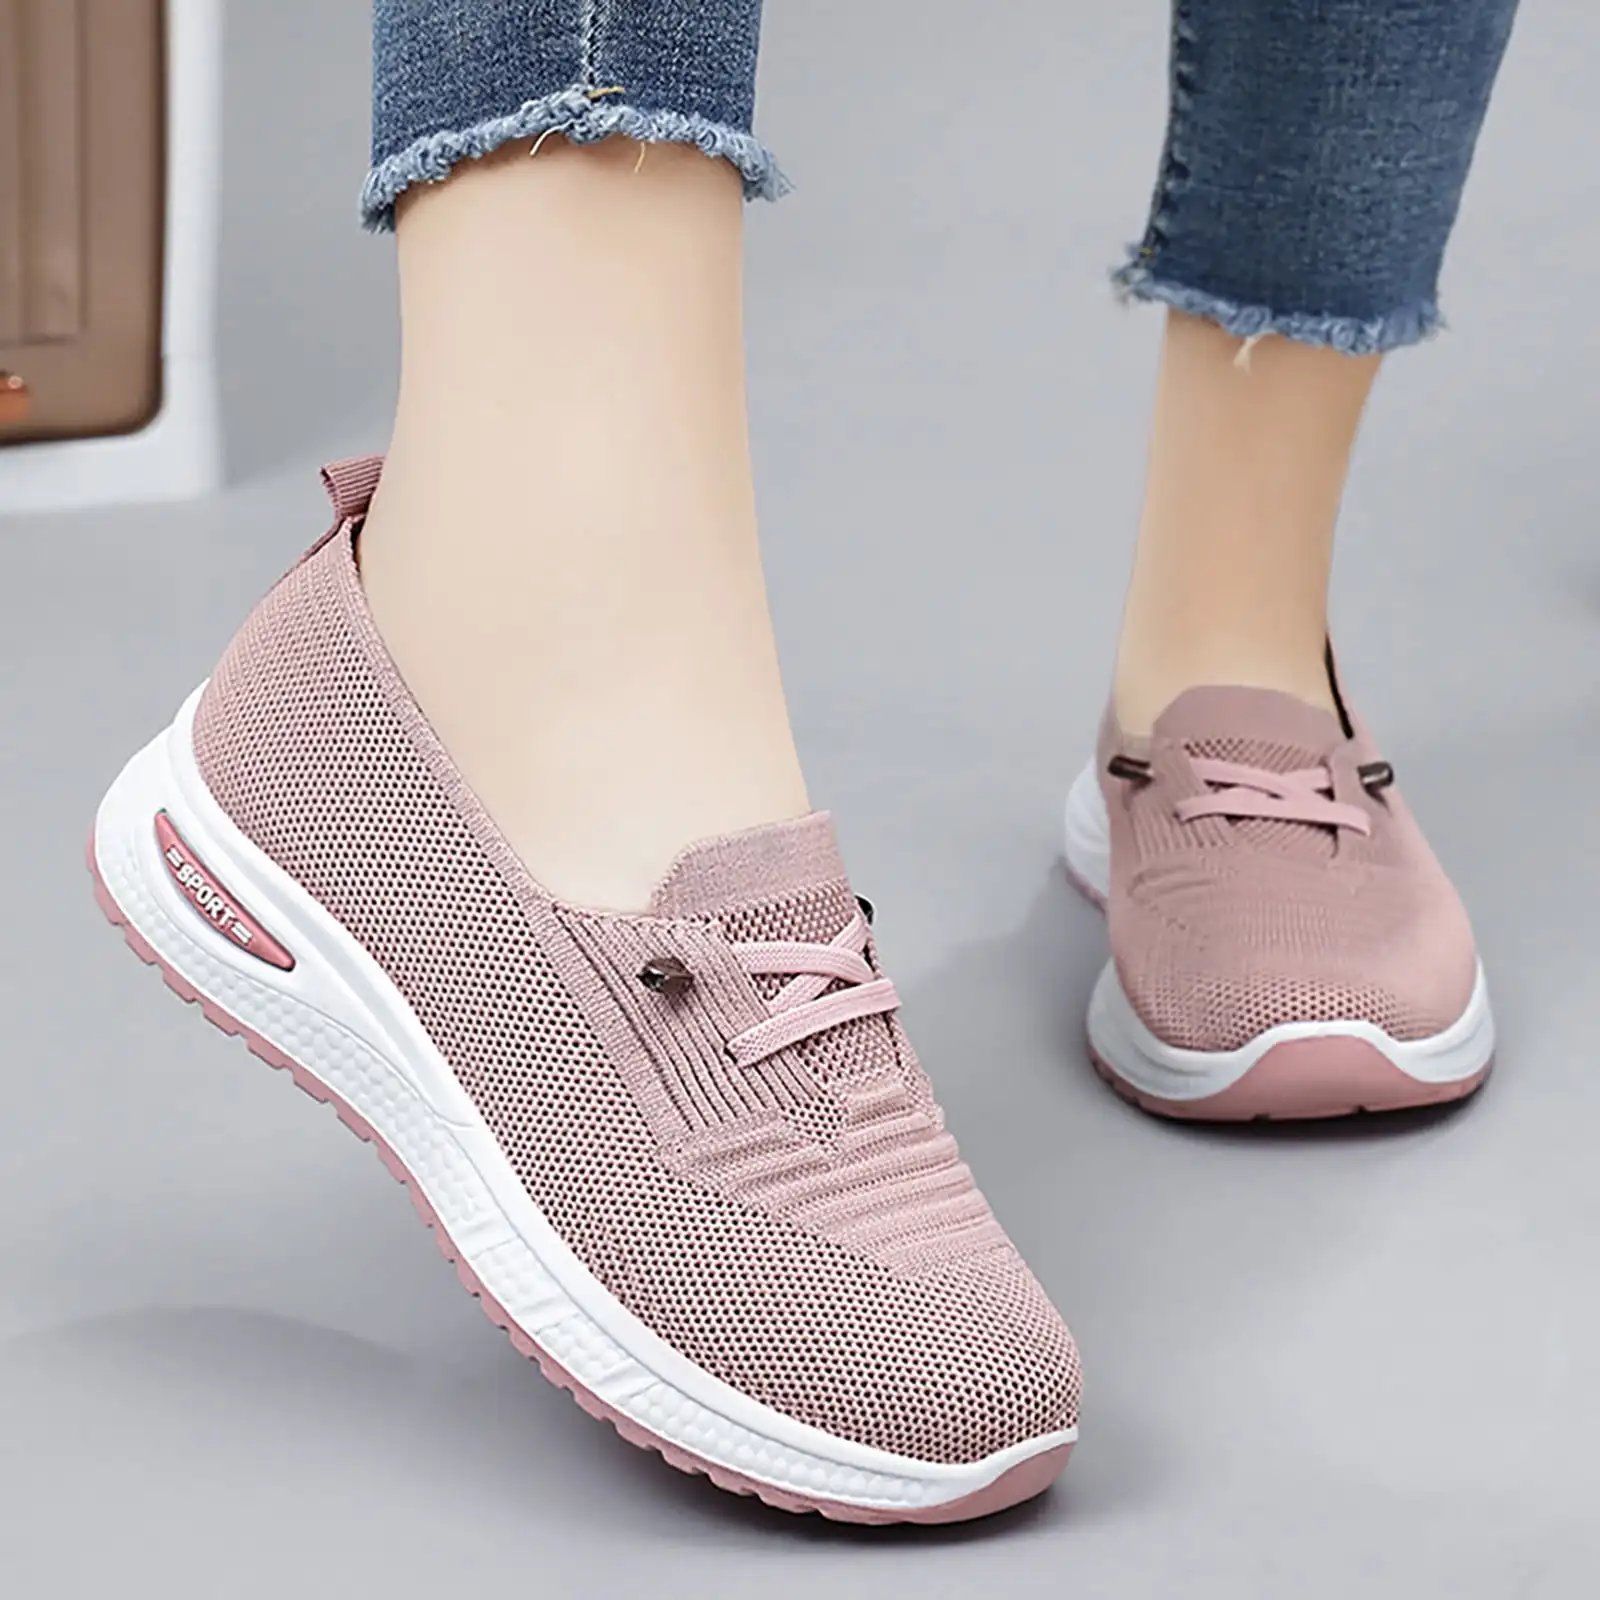 

2024 Knit detail outdoor sneakers women's sporty slip on shoes lace up woman mesh flats comfortable thick sole walking shoe pink